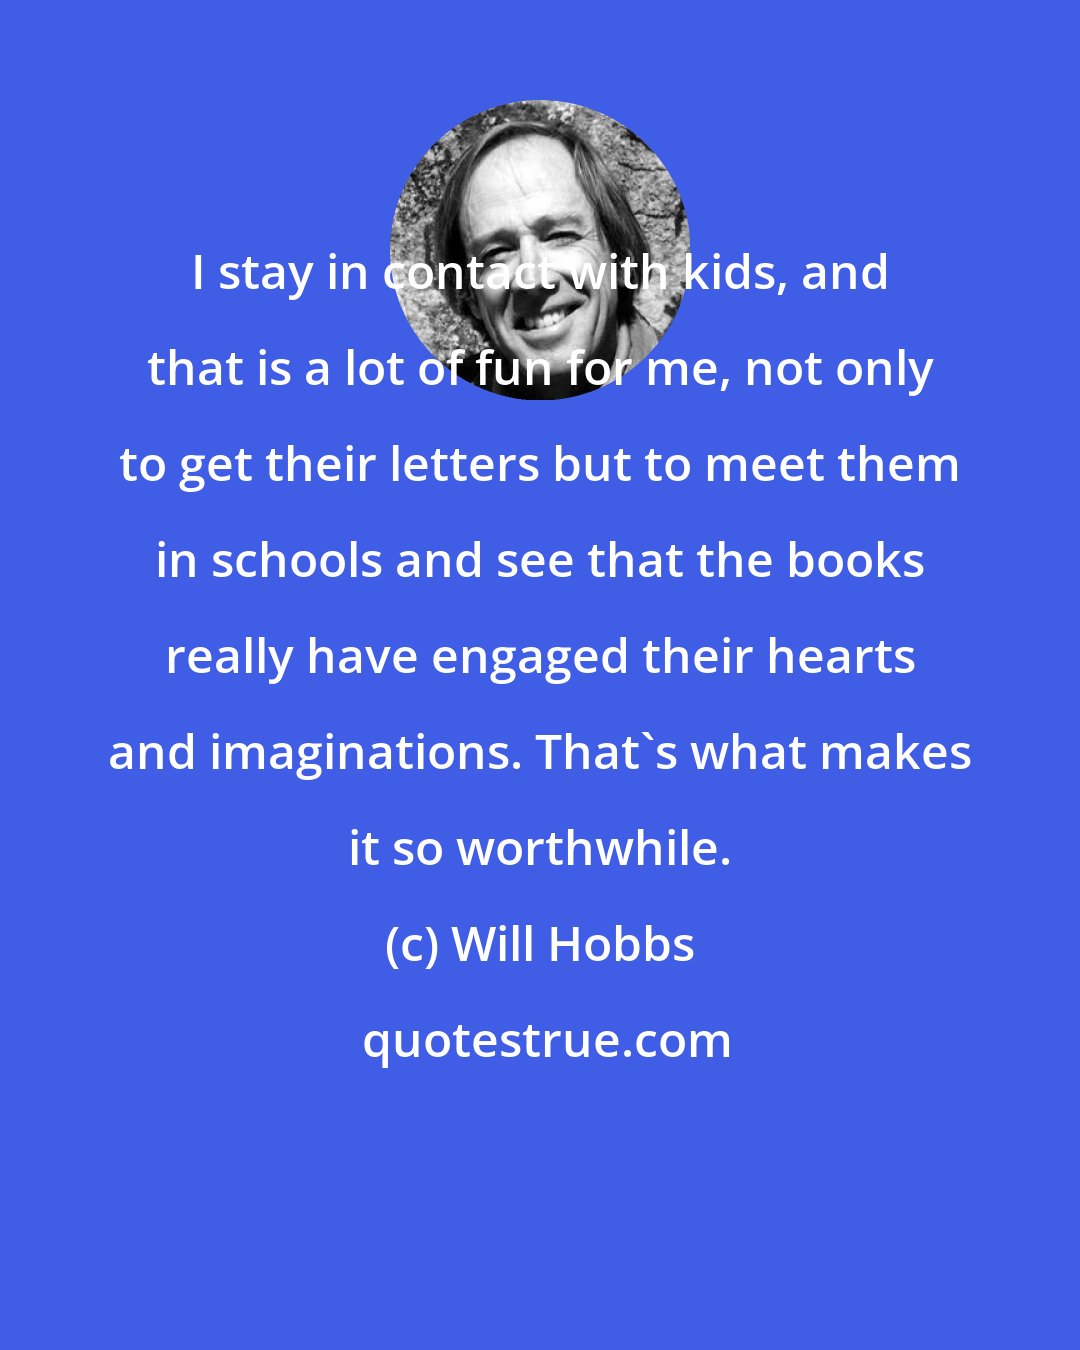 Will Hobbs: I stay in contact with kids, and that is a lot of fun for me, not only to get their letters but to meet them in schools and see that the books really have engaged their hearts and imaginations. That's what makes it so worthwhile.